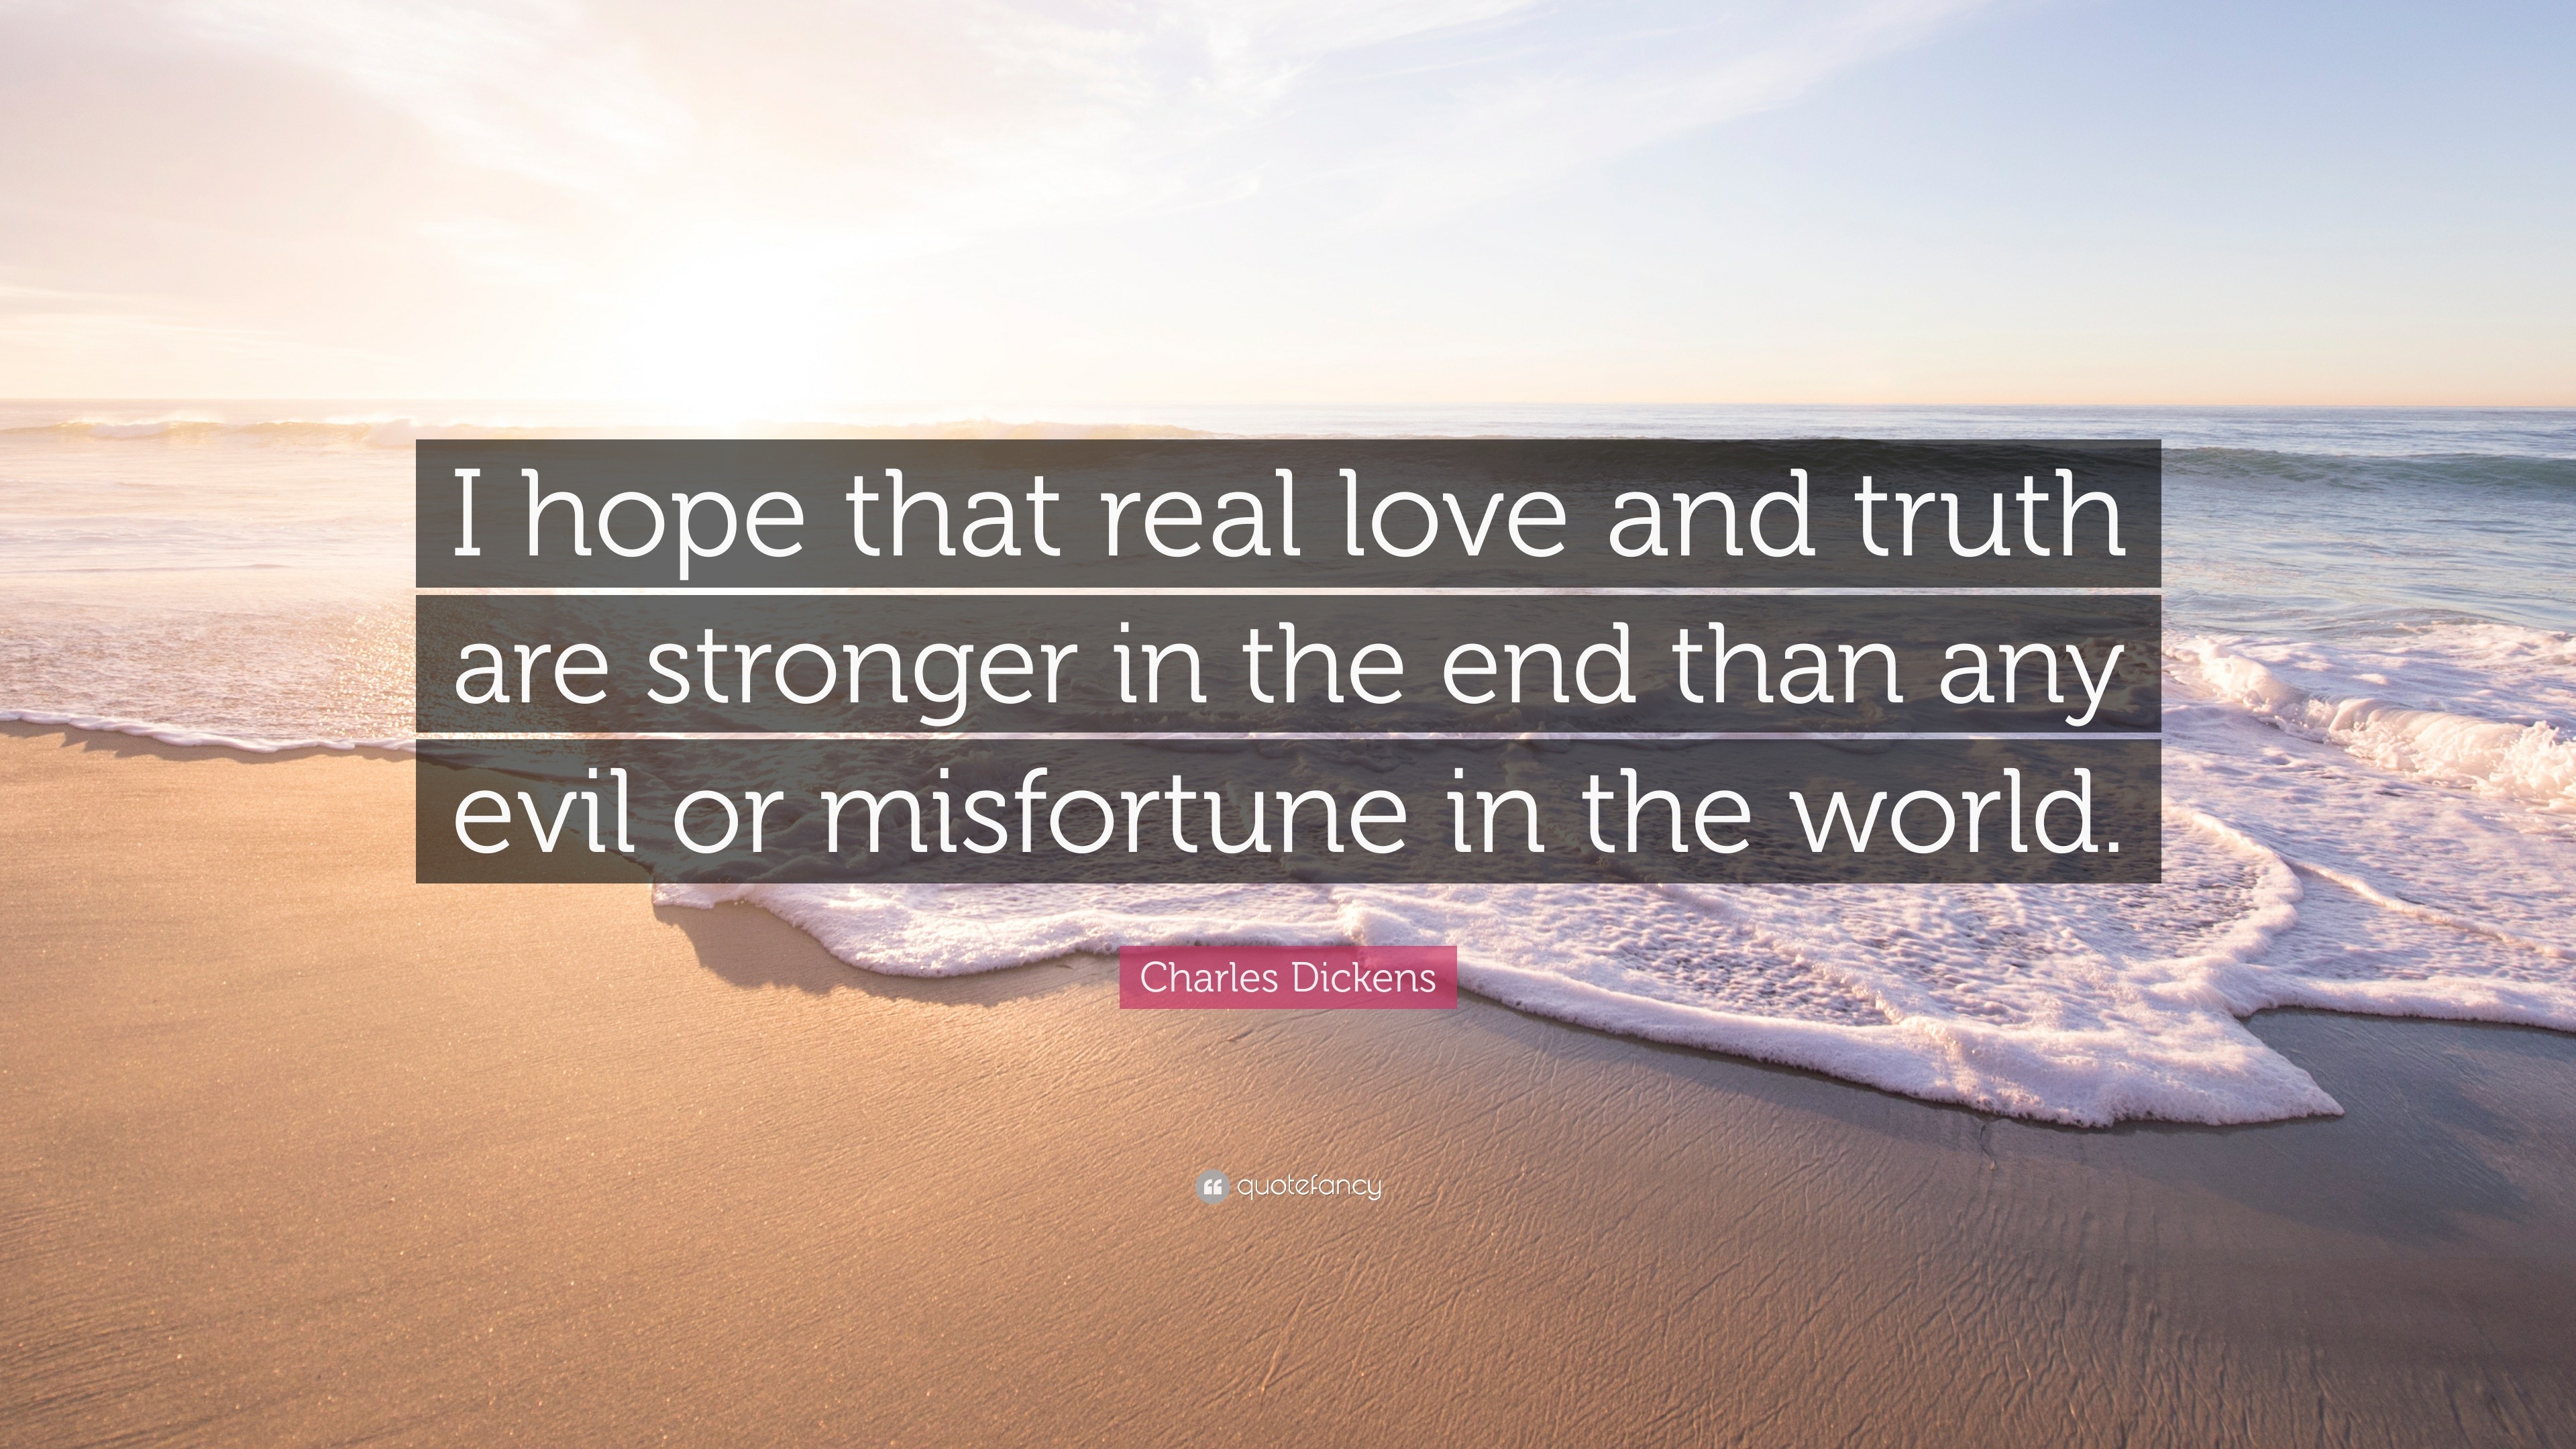 Charles Dickens Quote: “I hope that real love and truth are stronger in ...